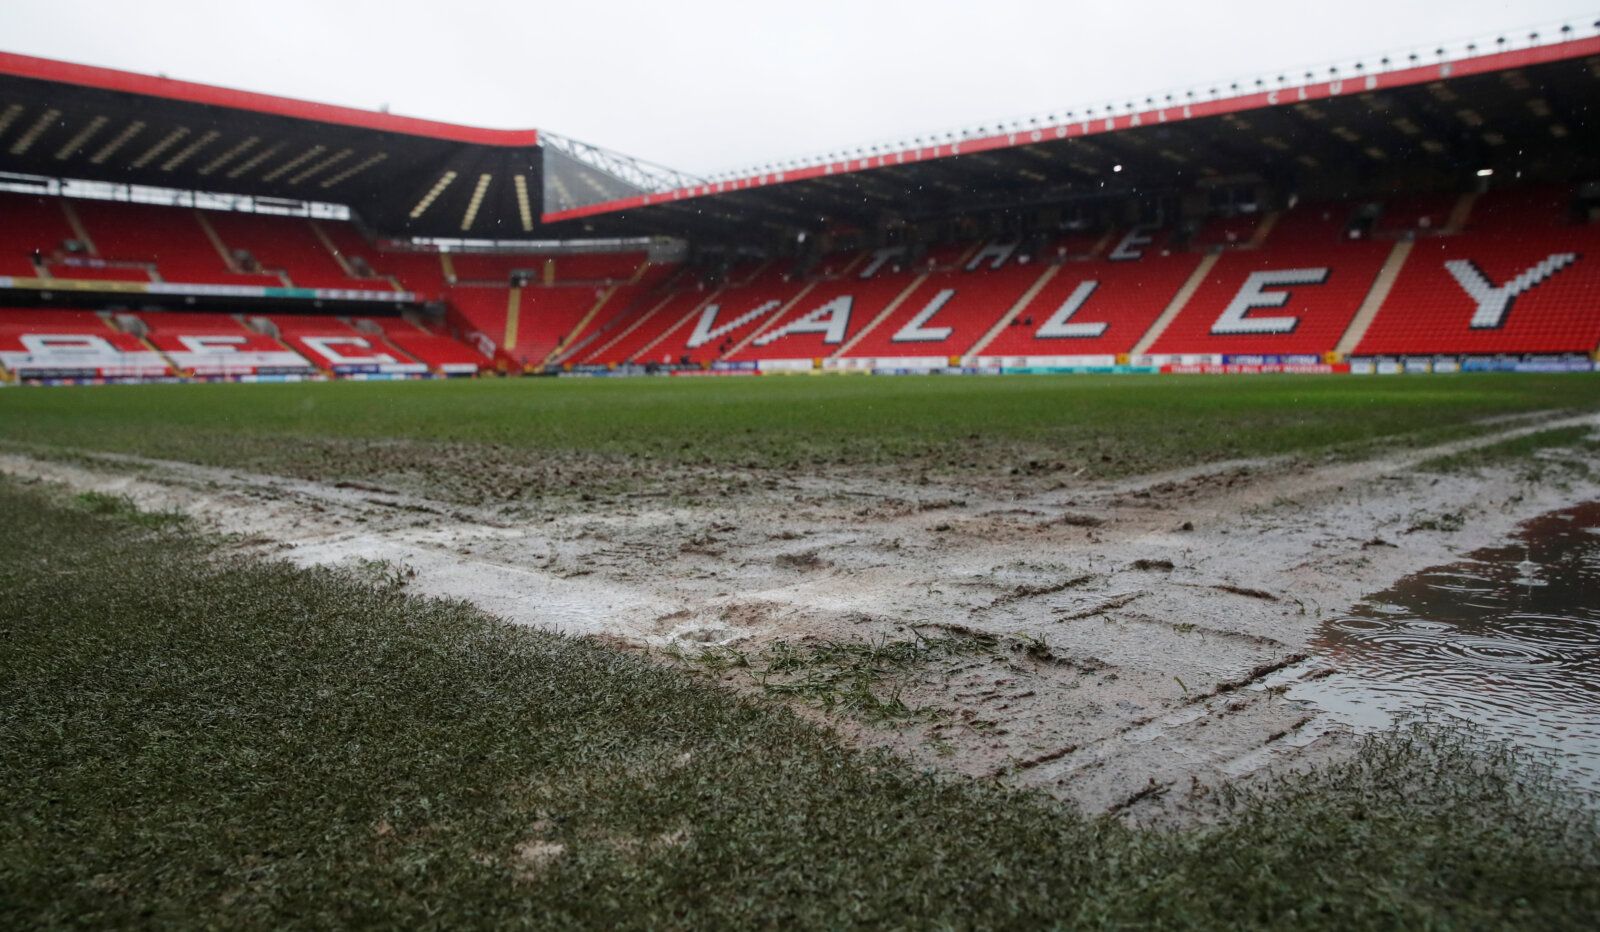 Soccer Football - League One - Charlton Athletic v Portsmouth - The Valley, London, Britain - January 30, 2021  General view of the pitch at The Valley as the game is called off because of a waterlogged pitch  Action Images/Andrew Couldridge  EDITORIAL USE ONLY. No use with unauthorized audio, video, data, fixture lists, club/league logos or 